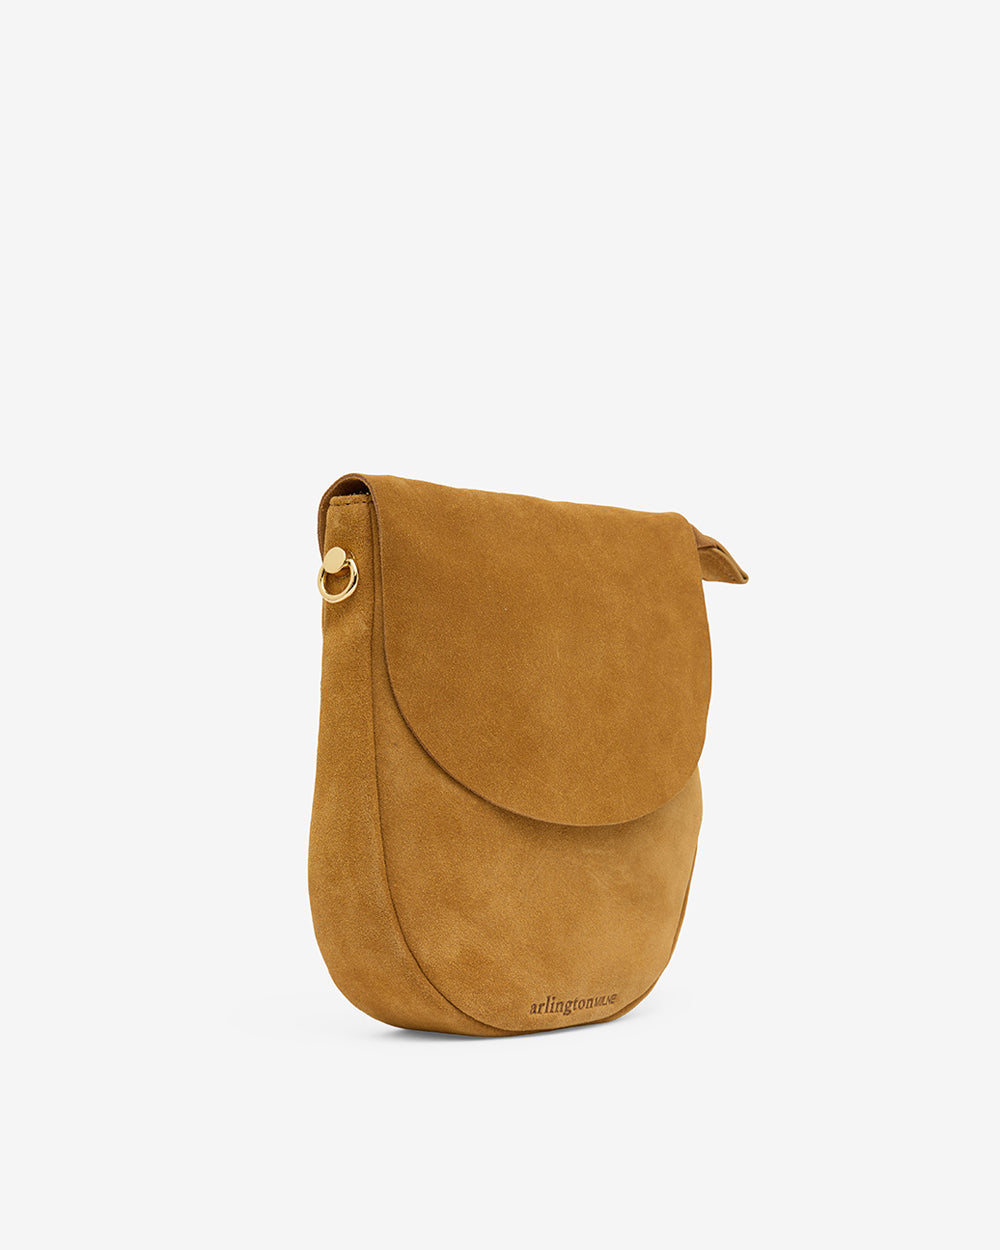 Phoebe Pouch - Toffee Suede